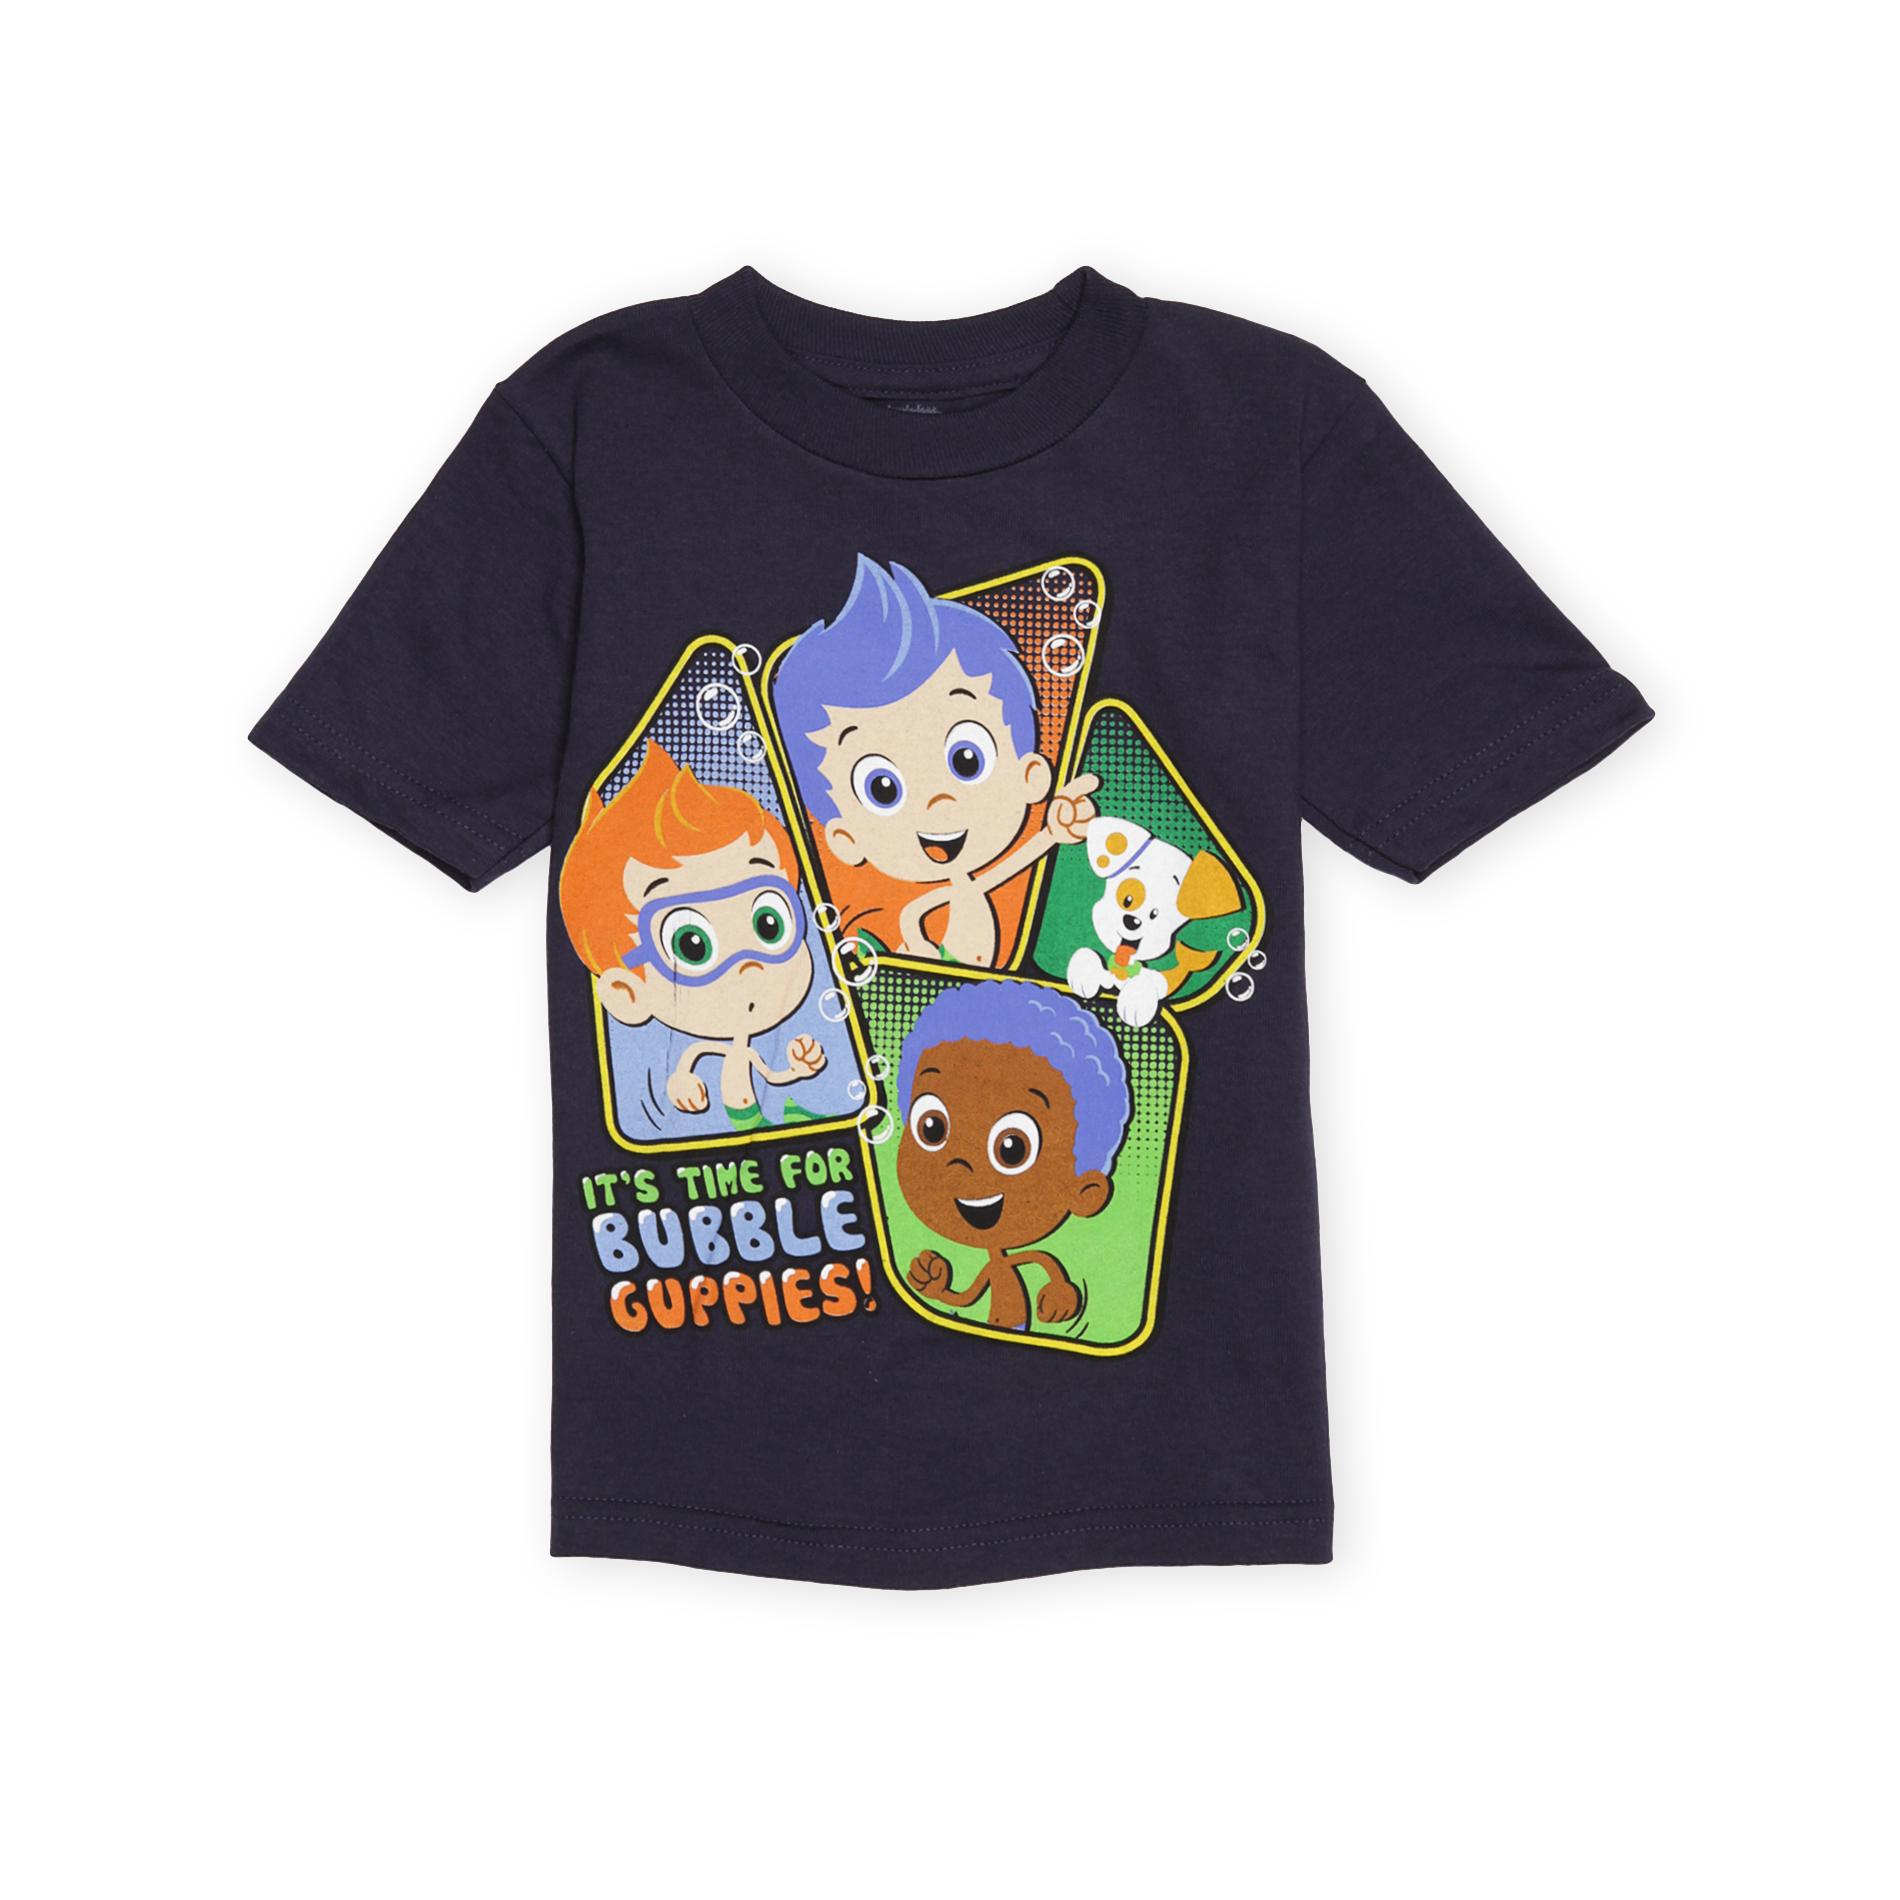 Nickelodeon Bubble Guppies Toddler Boy's Graphic T-Shirt